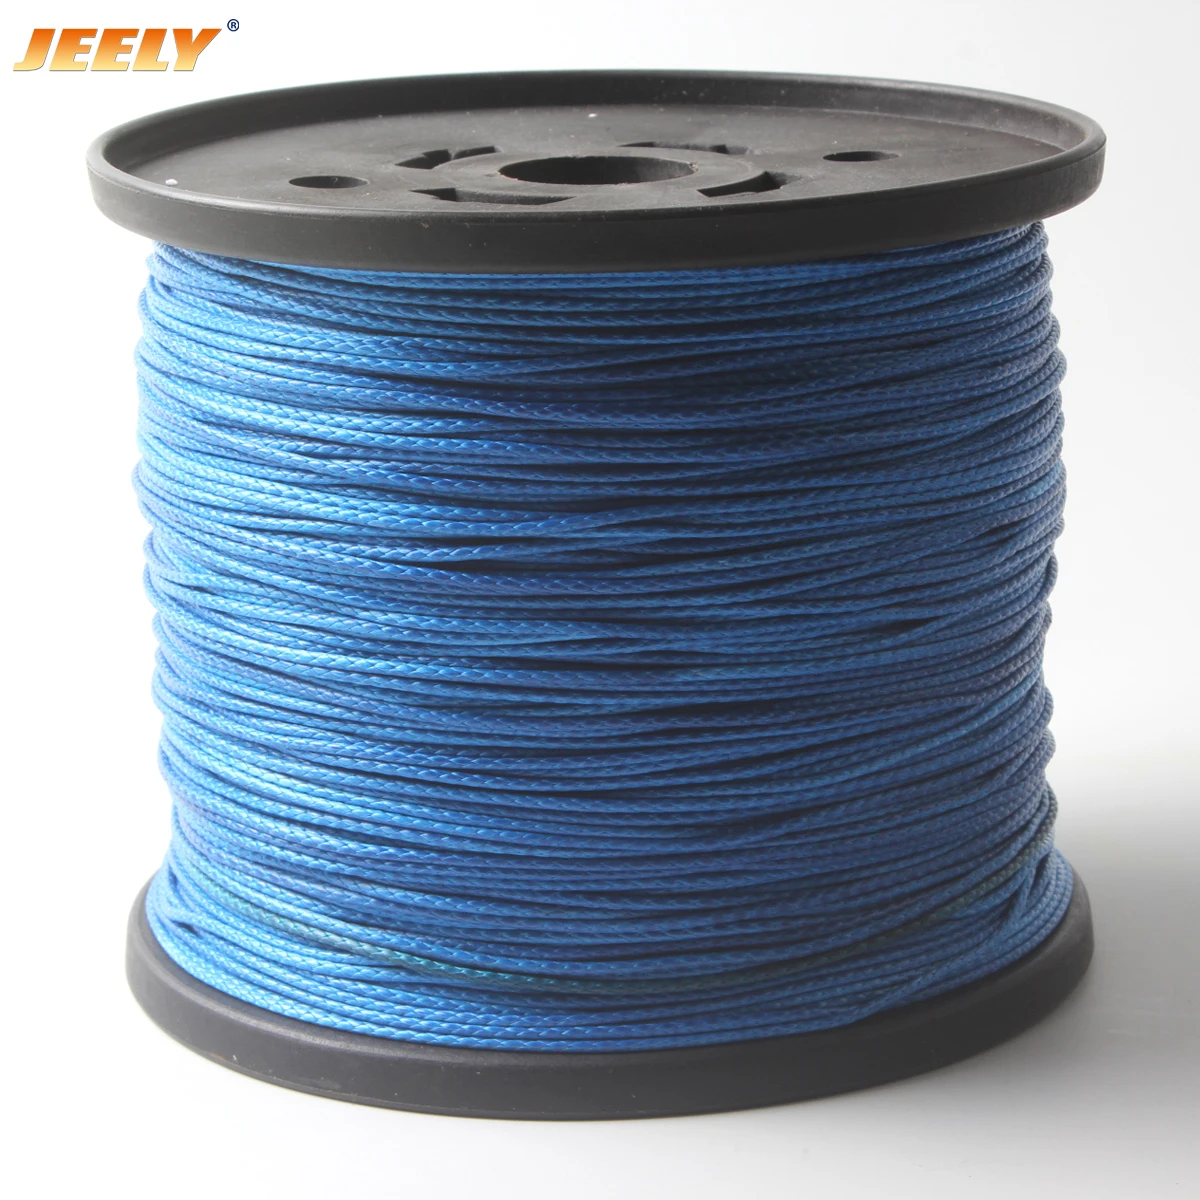 

JEELY 100m 1000lb UHMWPE Hollow Braided Spearfishing Rope 2mm 12 weave